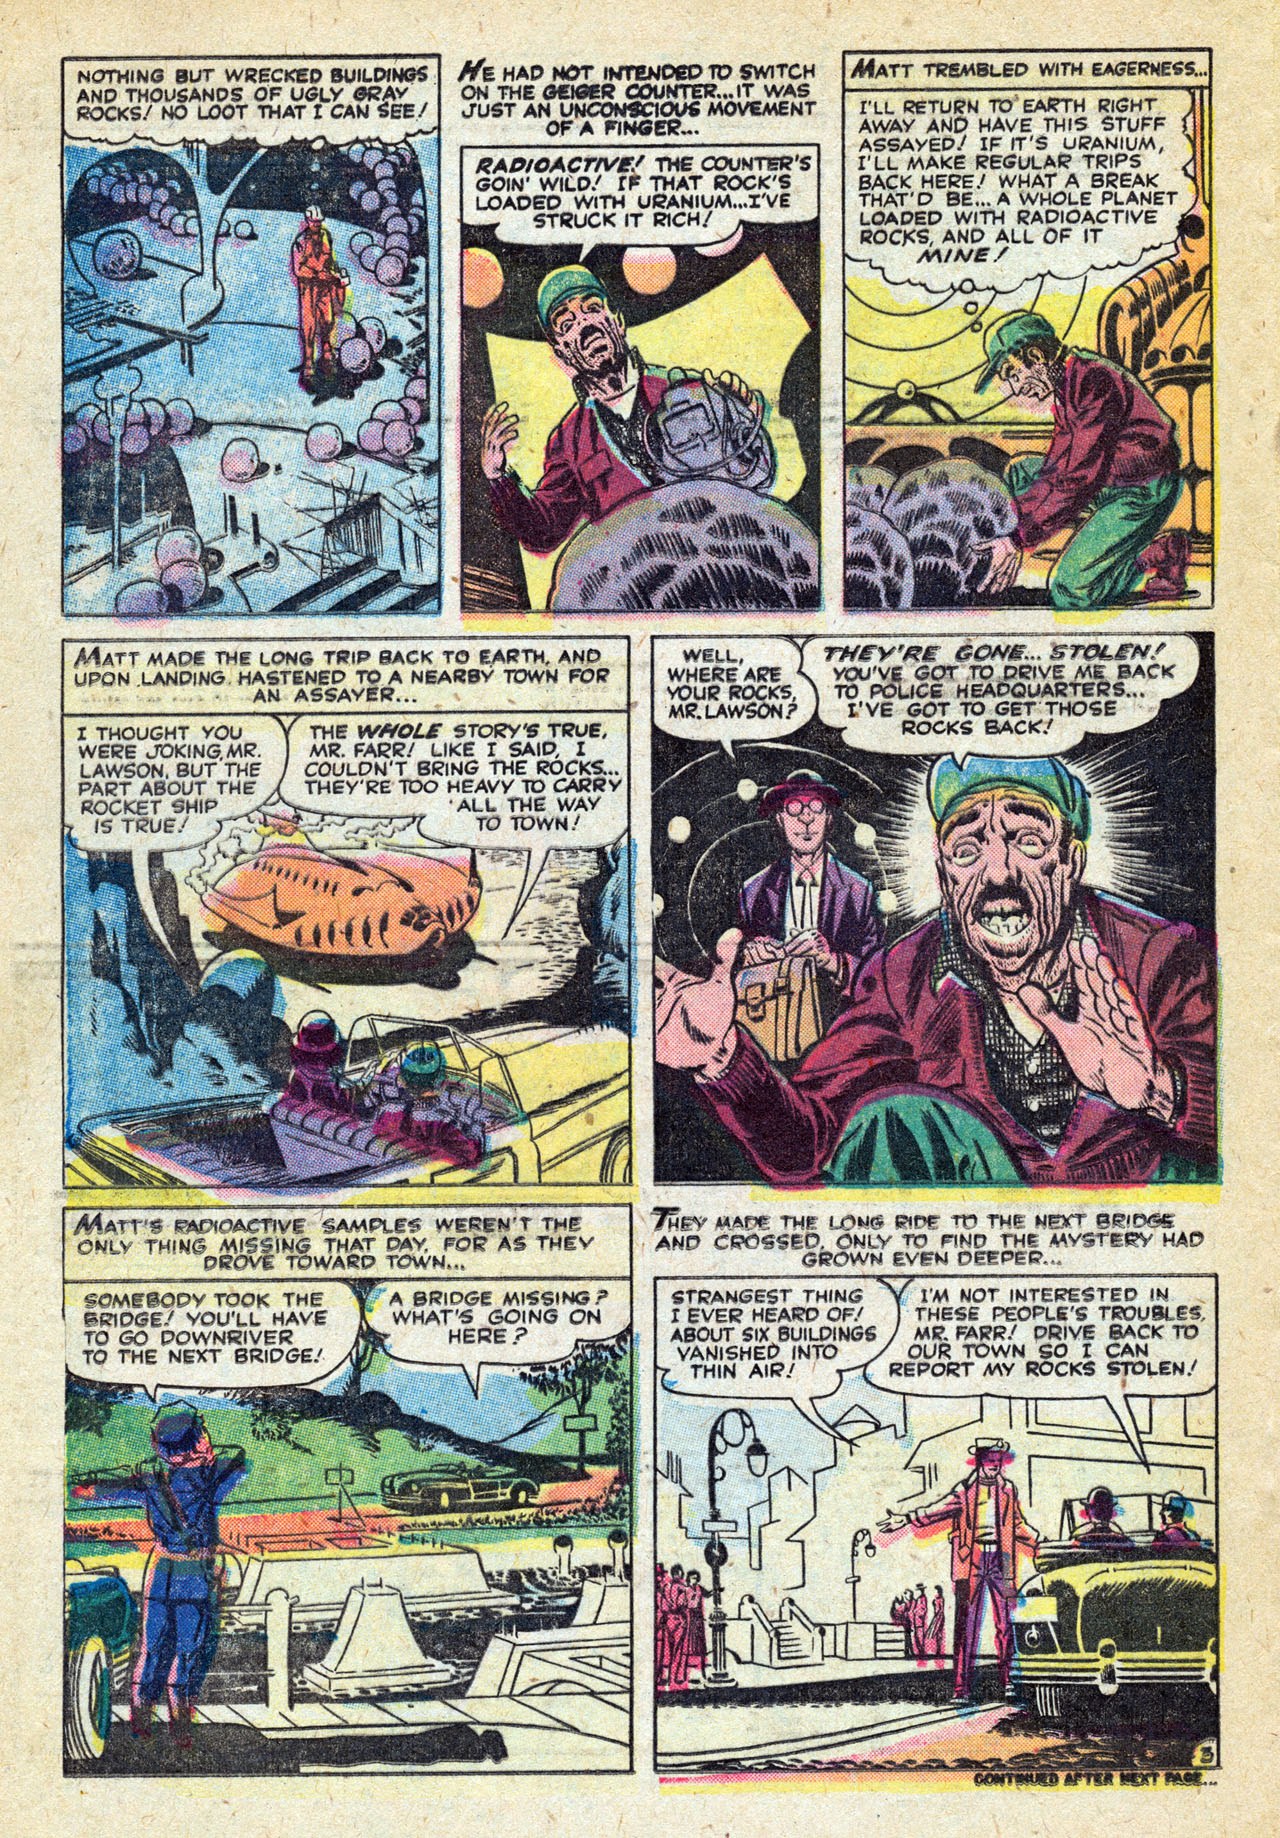 Marvel Tales (1949) 147 Page 19